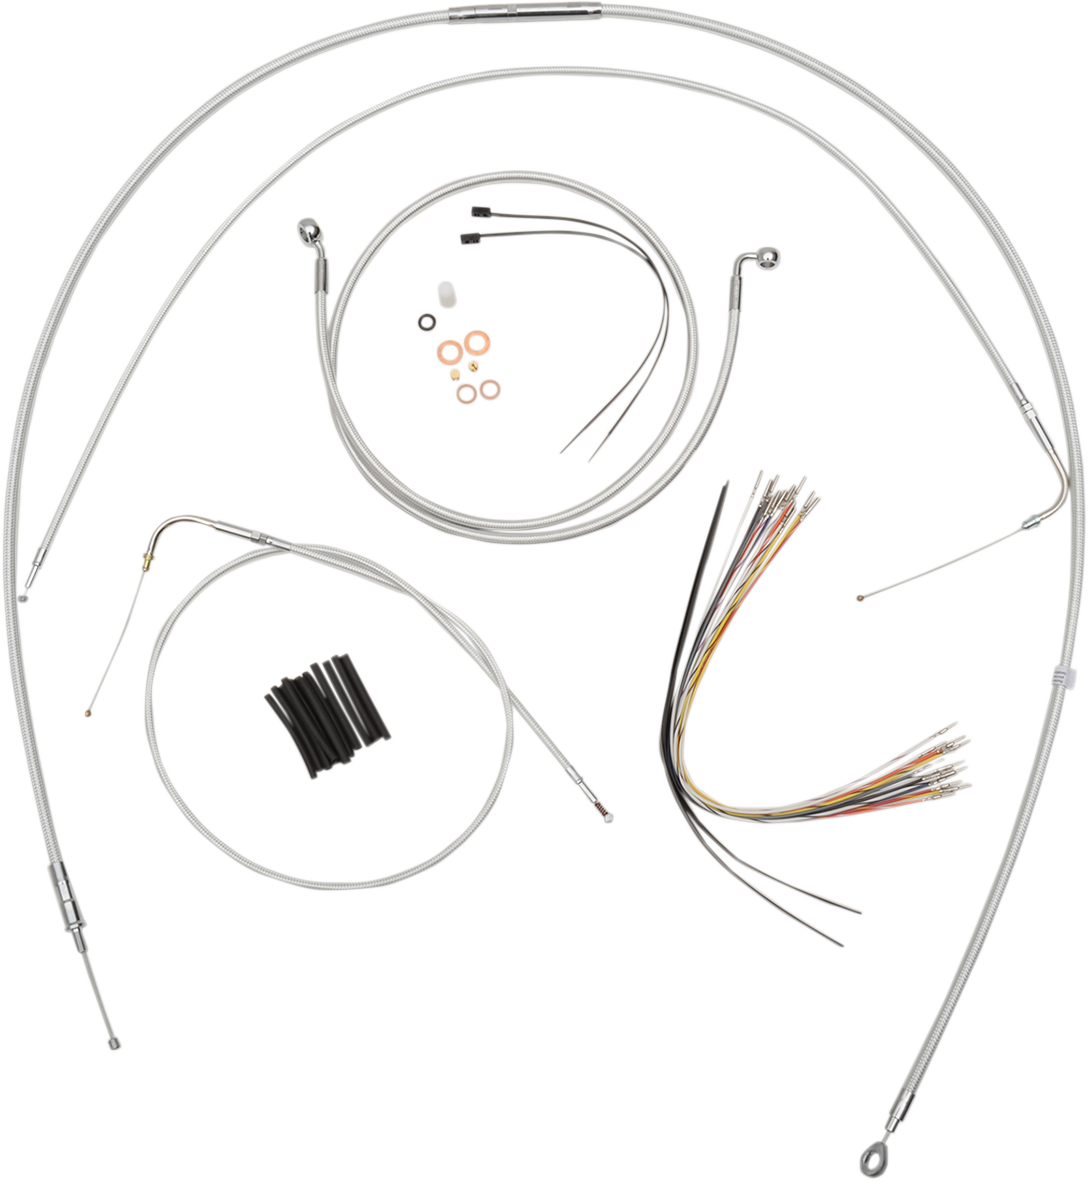 0662-0098 - MAGNUM Control Cable Kit - Sterling Chromite II? 387722